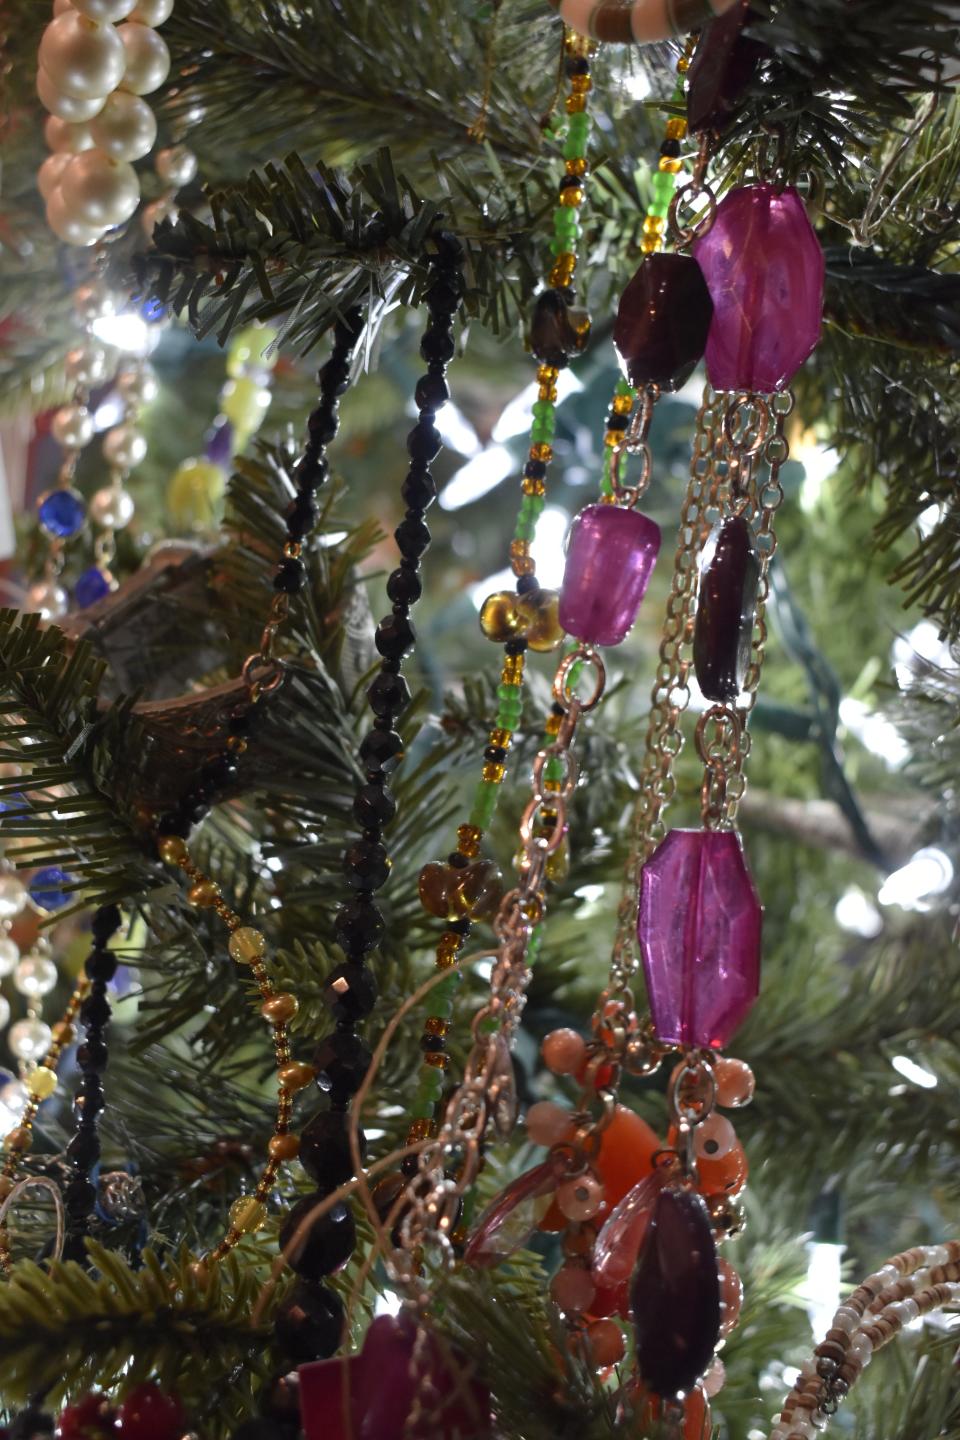 A Christmas tree at Spencer's CommUnity Center on the Owen County Courthouse Square is decorated with vintage jewelry for sale.